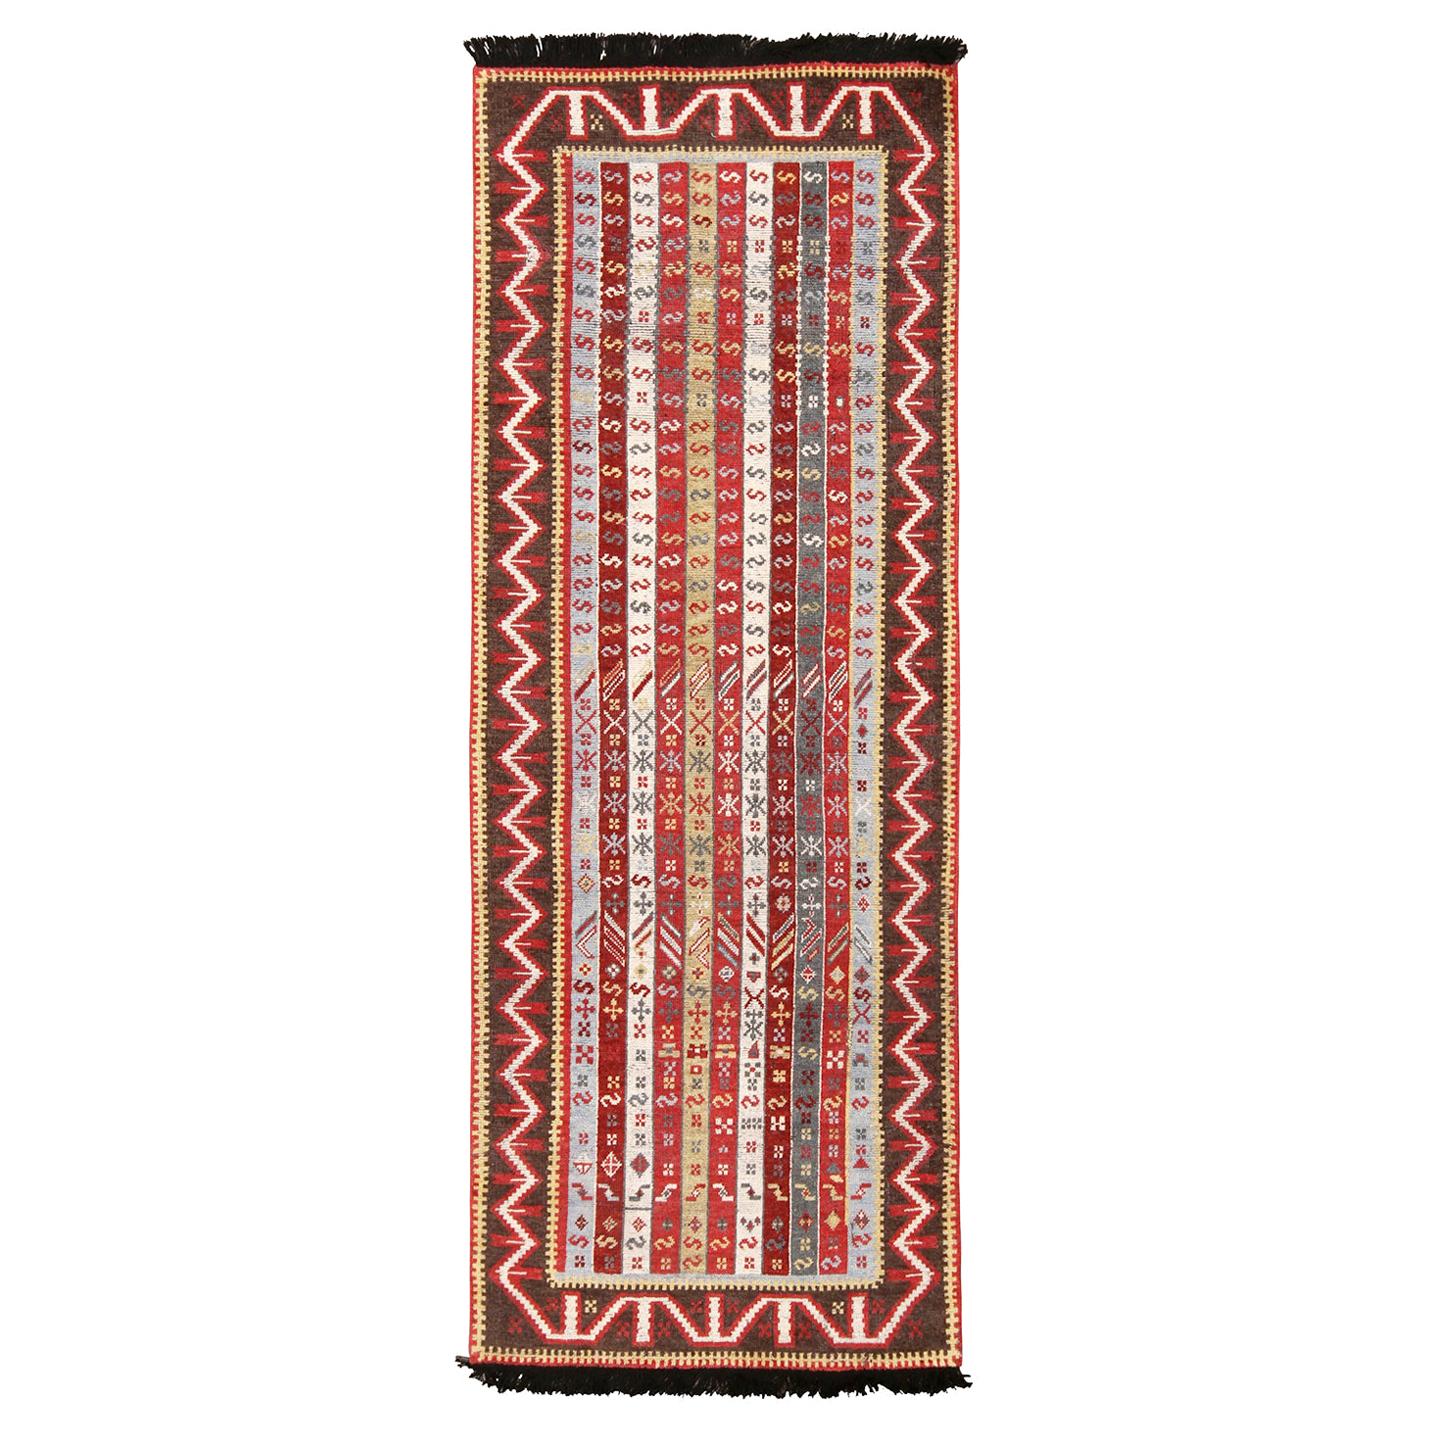 Rug & Kilim's Burano Burgundy Red and Blue Wool Runner Rug with Antique Hook